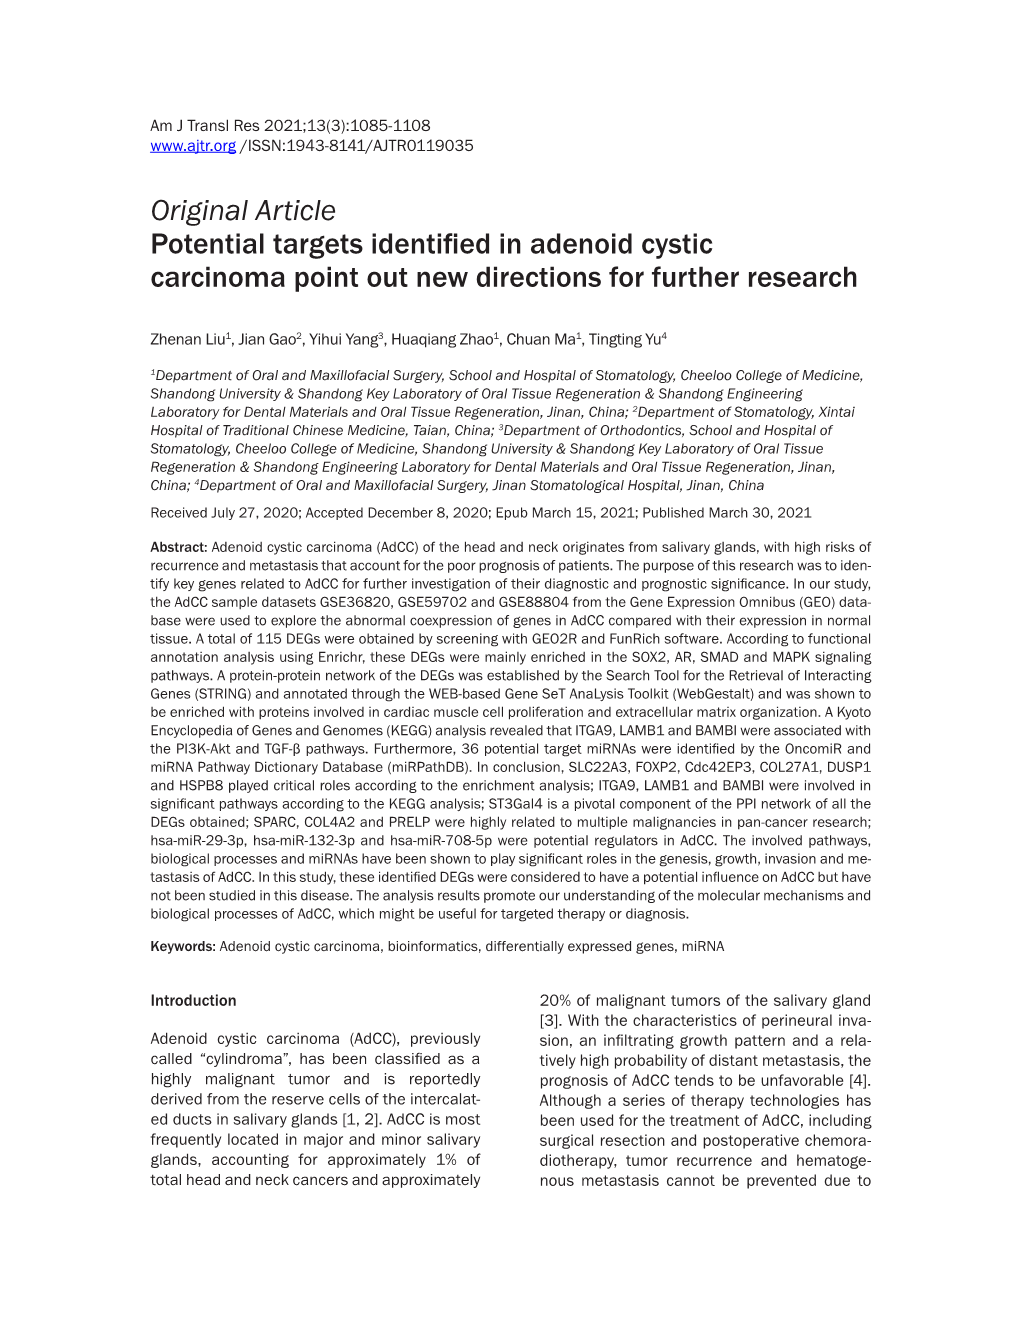 Original Article Potential Targets Identified in Adenoid Cystic Carcinoma Point out New Directions for Further Research